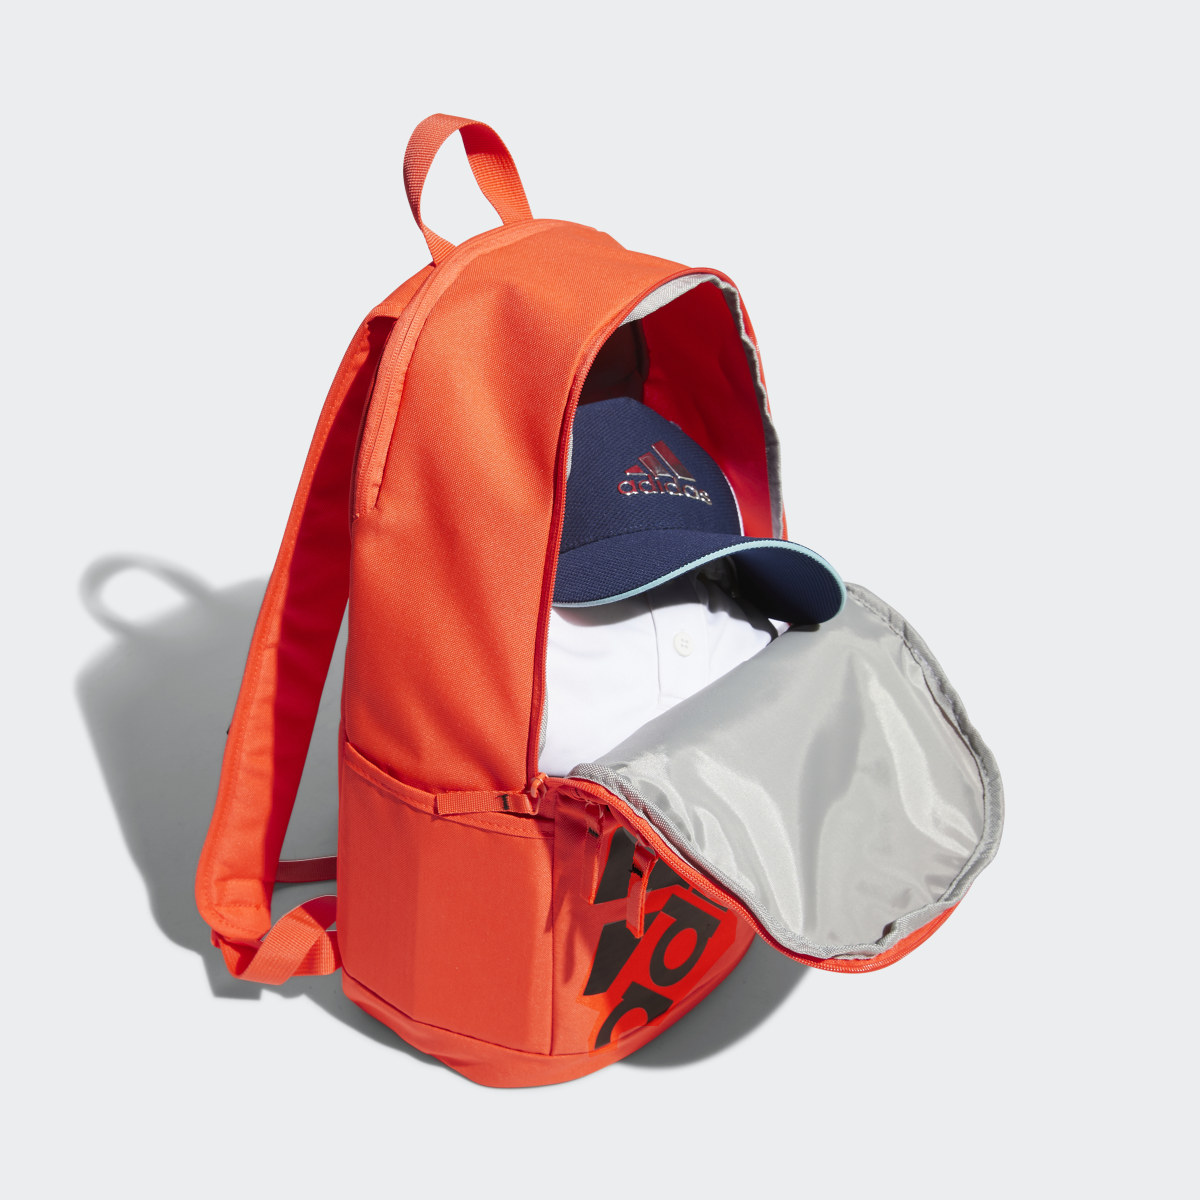 Adidas CL Classic Backpack. 5